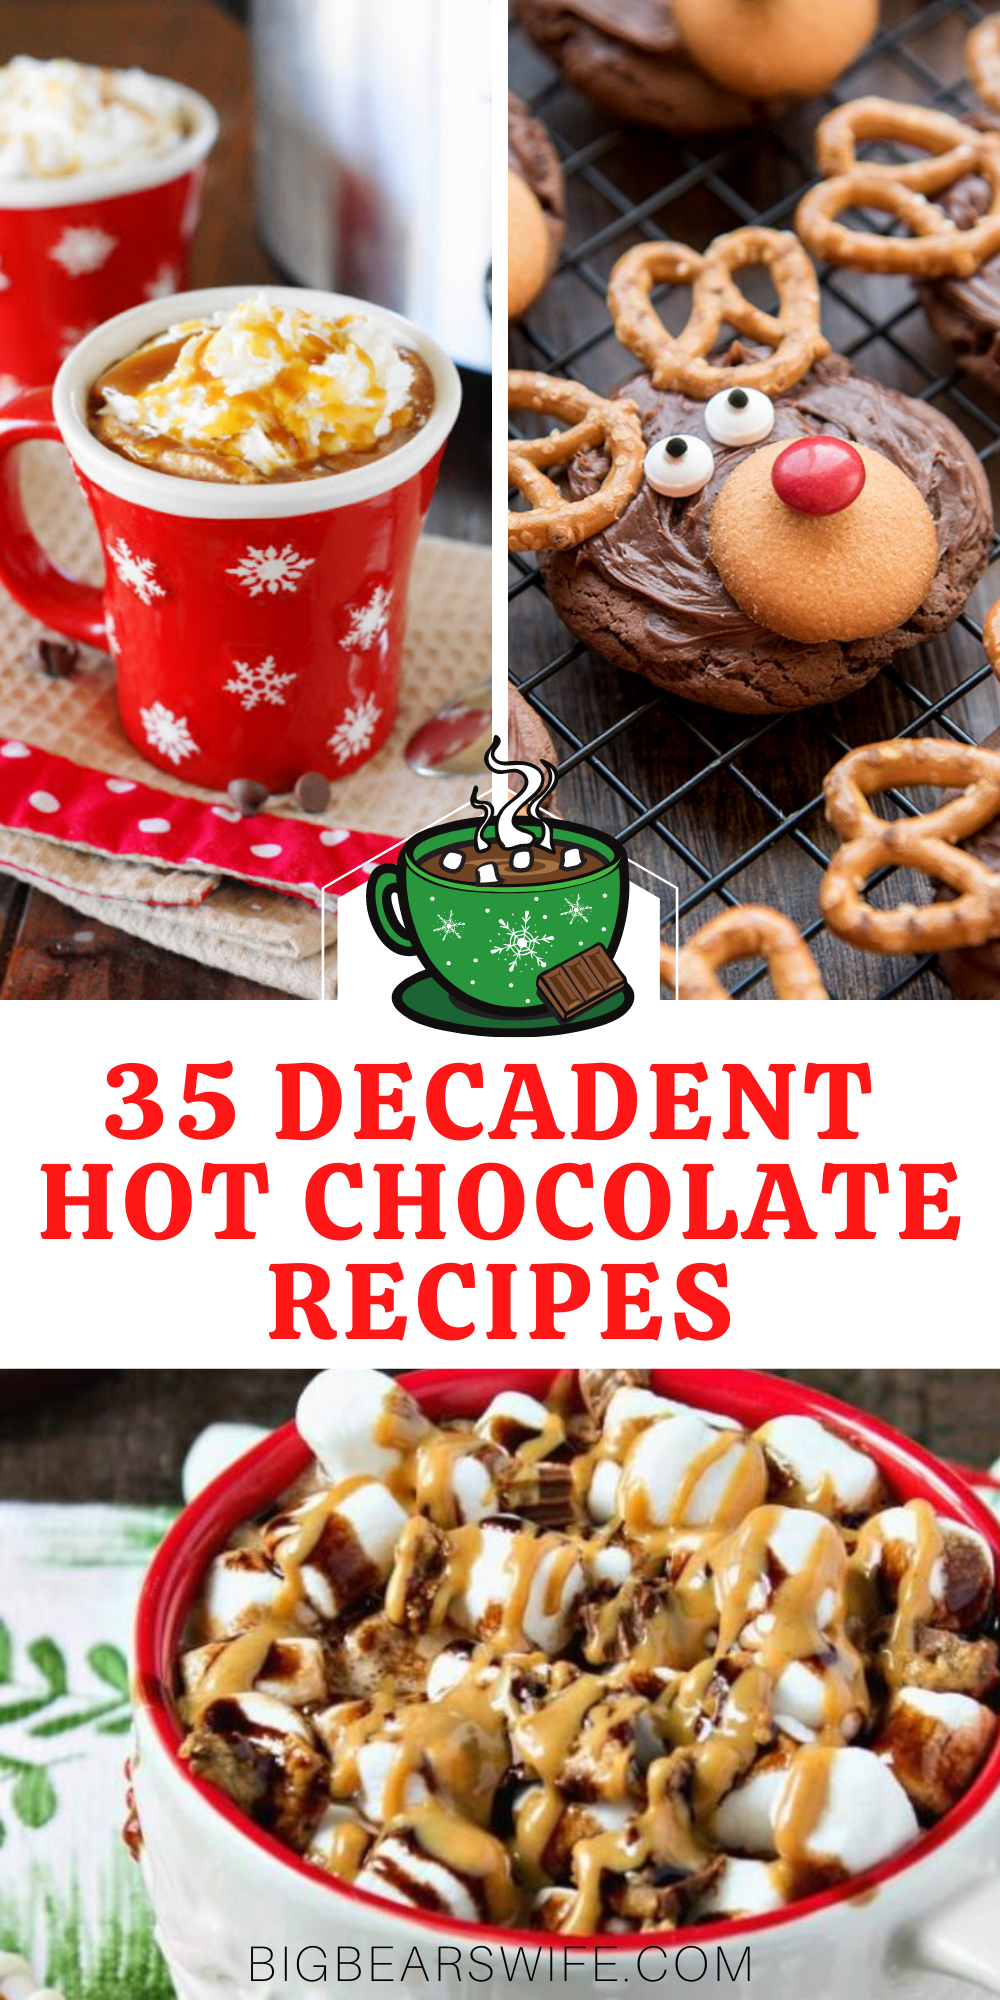 Need a little something to warm you up during these cold winter nights? Here you'll find 35 Decadent Hot Chocolate Recipes Plus 3 Hot Chocolate gifts from the kitchen! There is also a little information on how to set up your own holiday Hot Chocolate Bar! via @bigbearswife